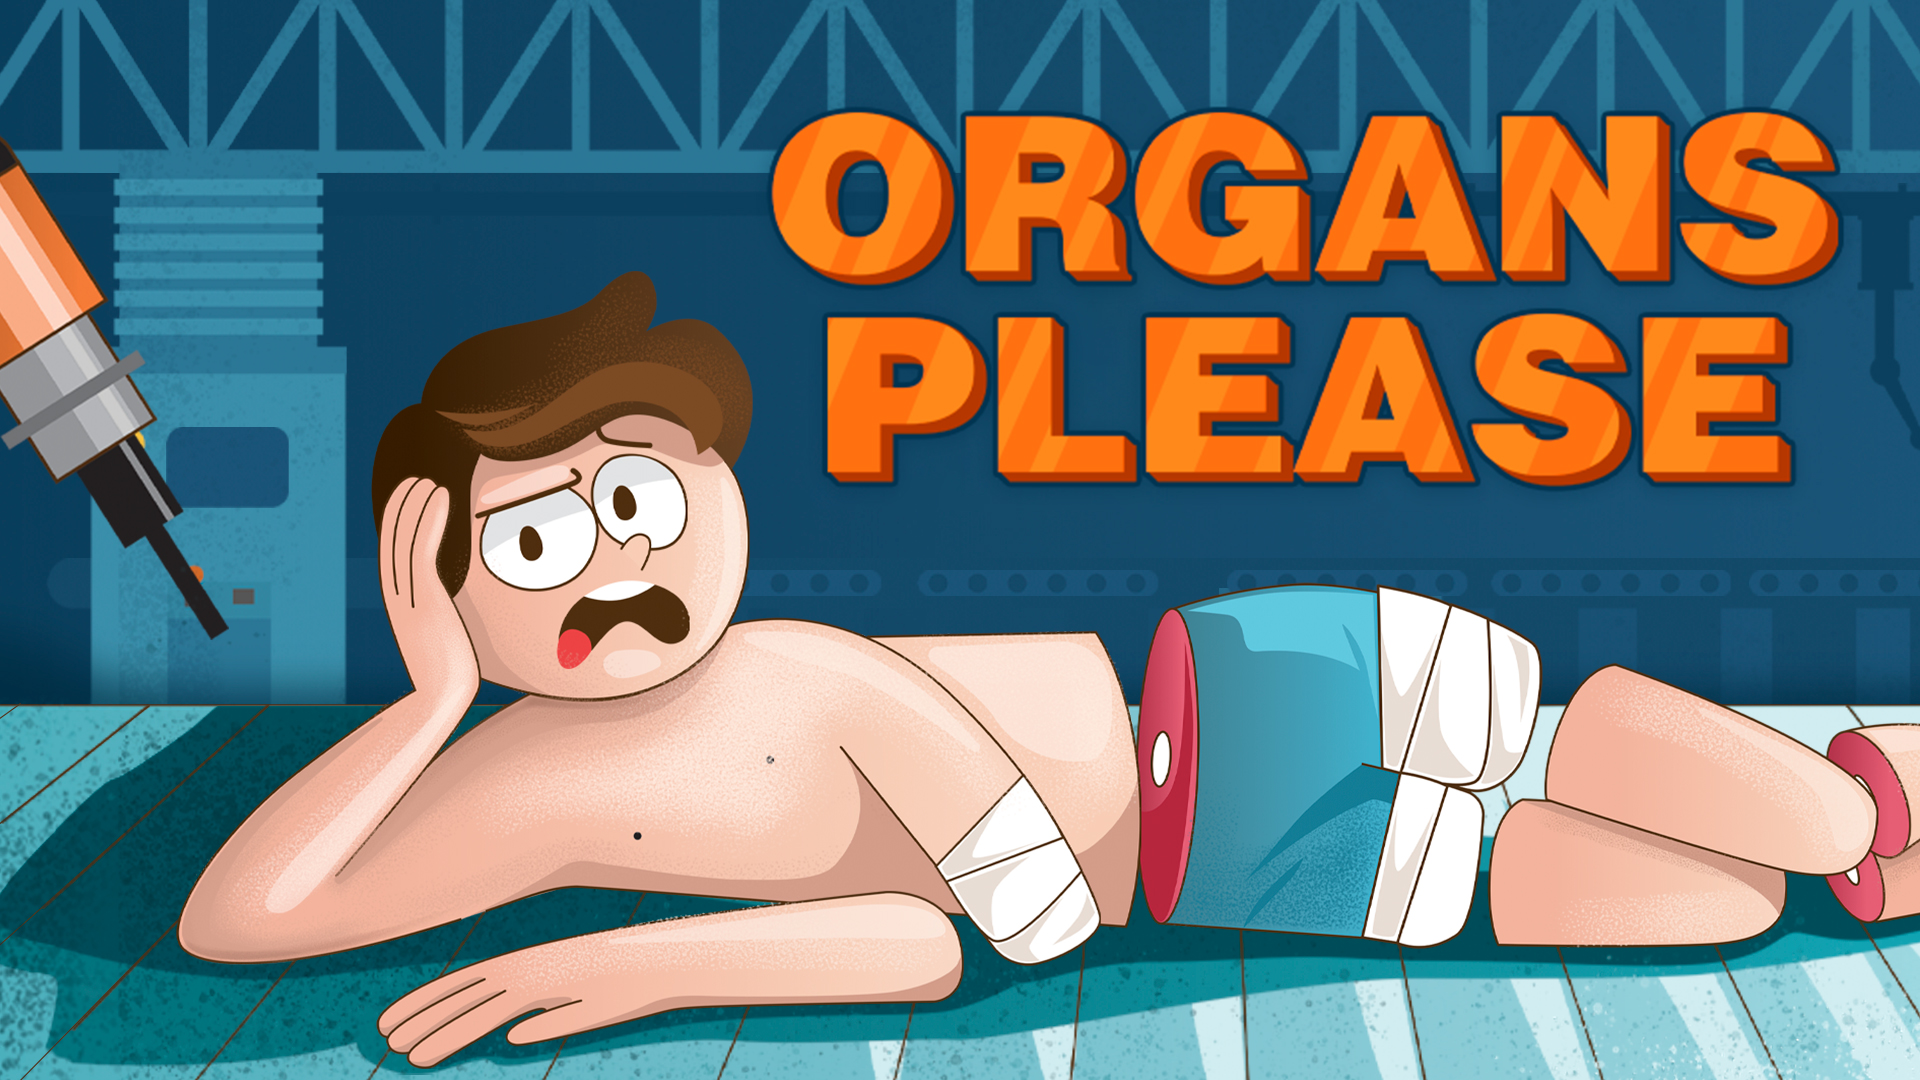 Organs Please download the new version